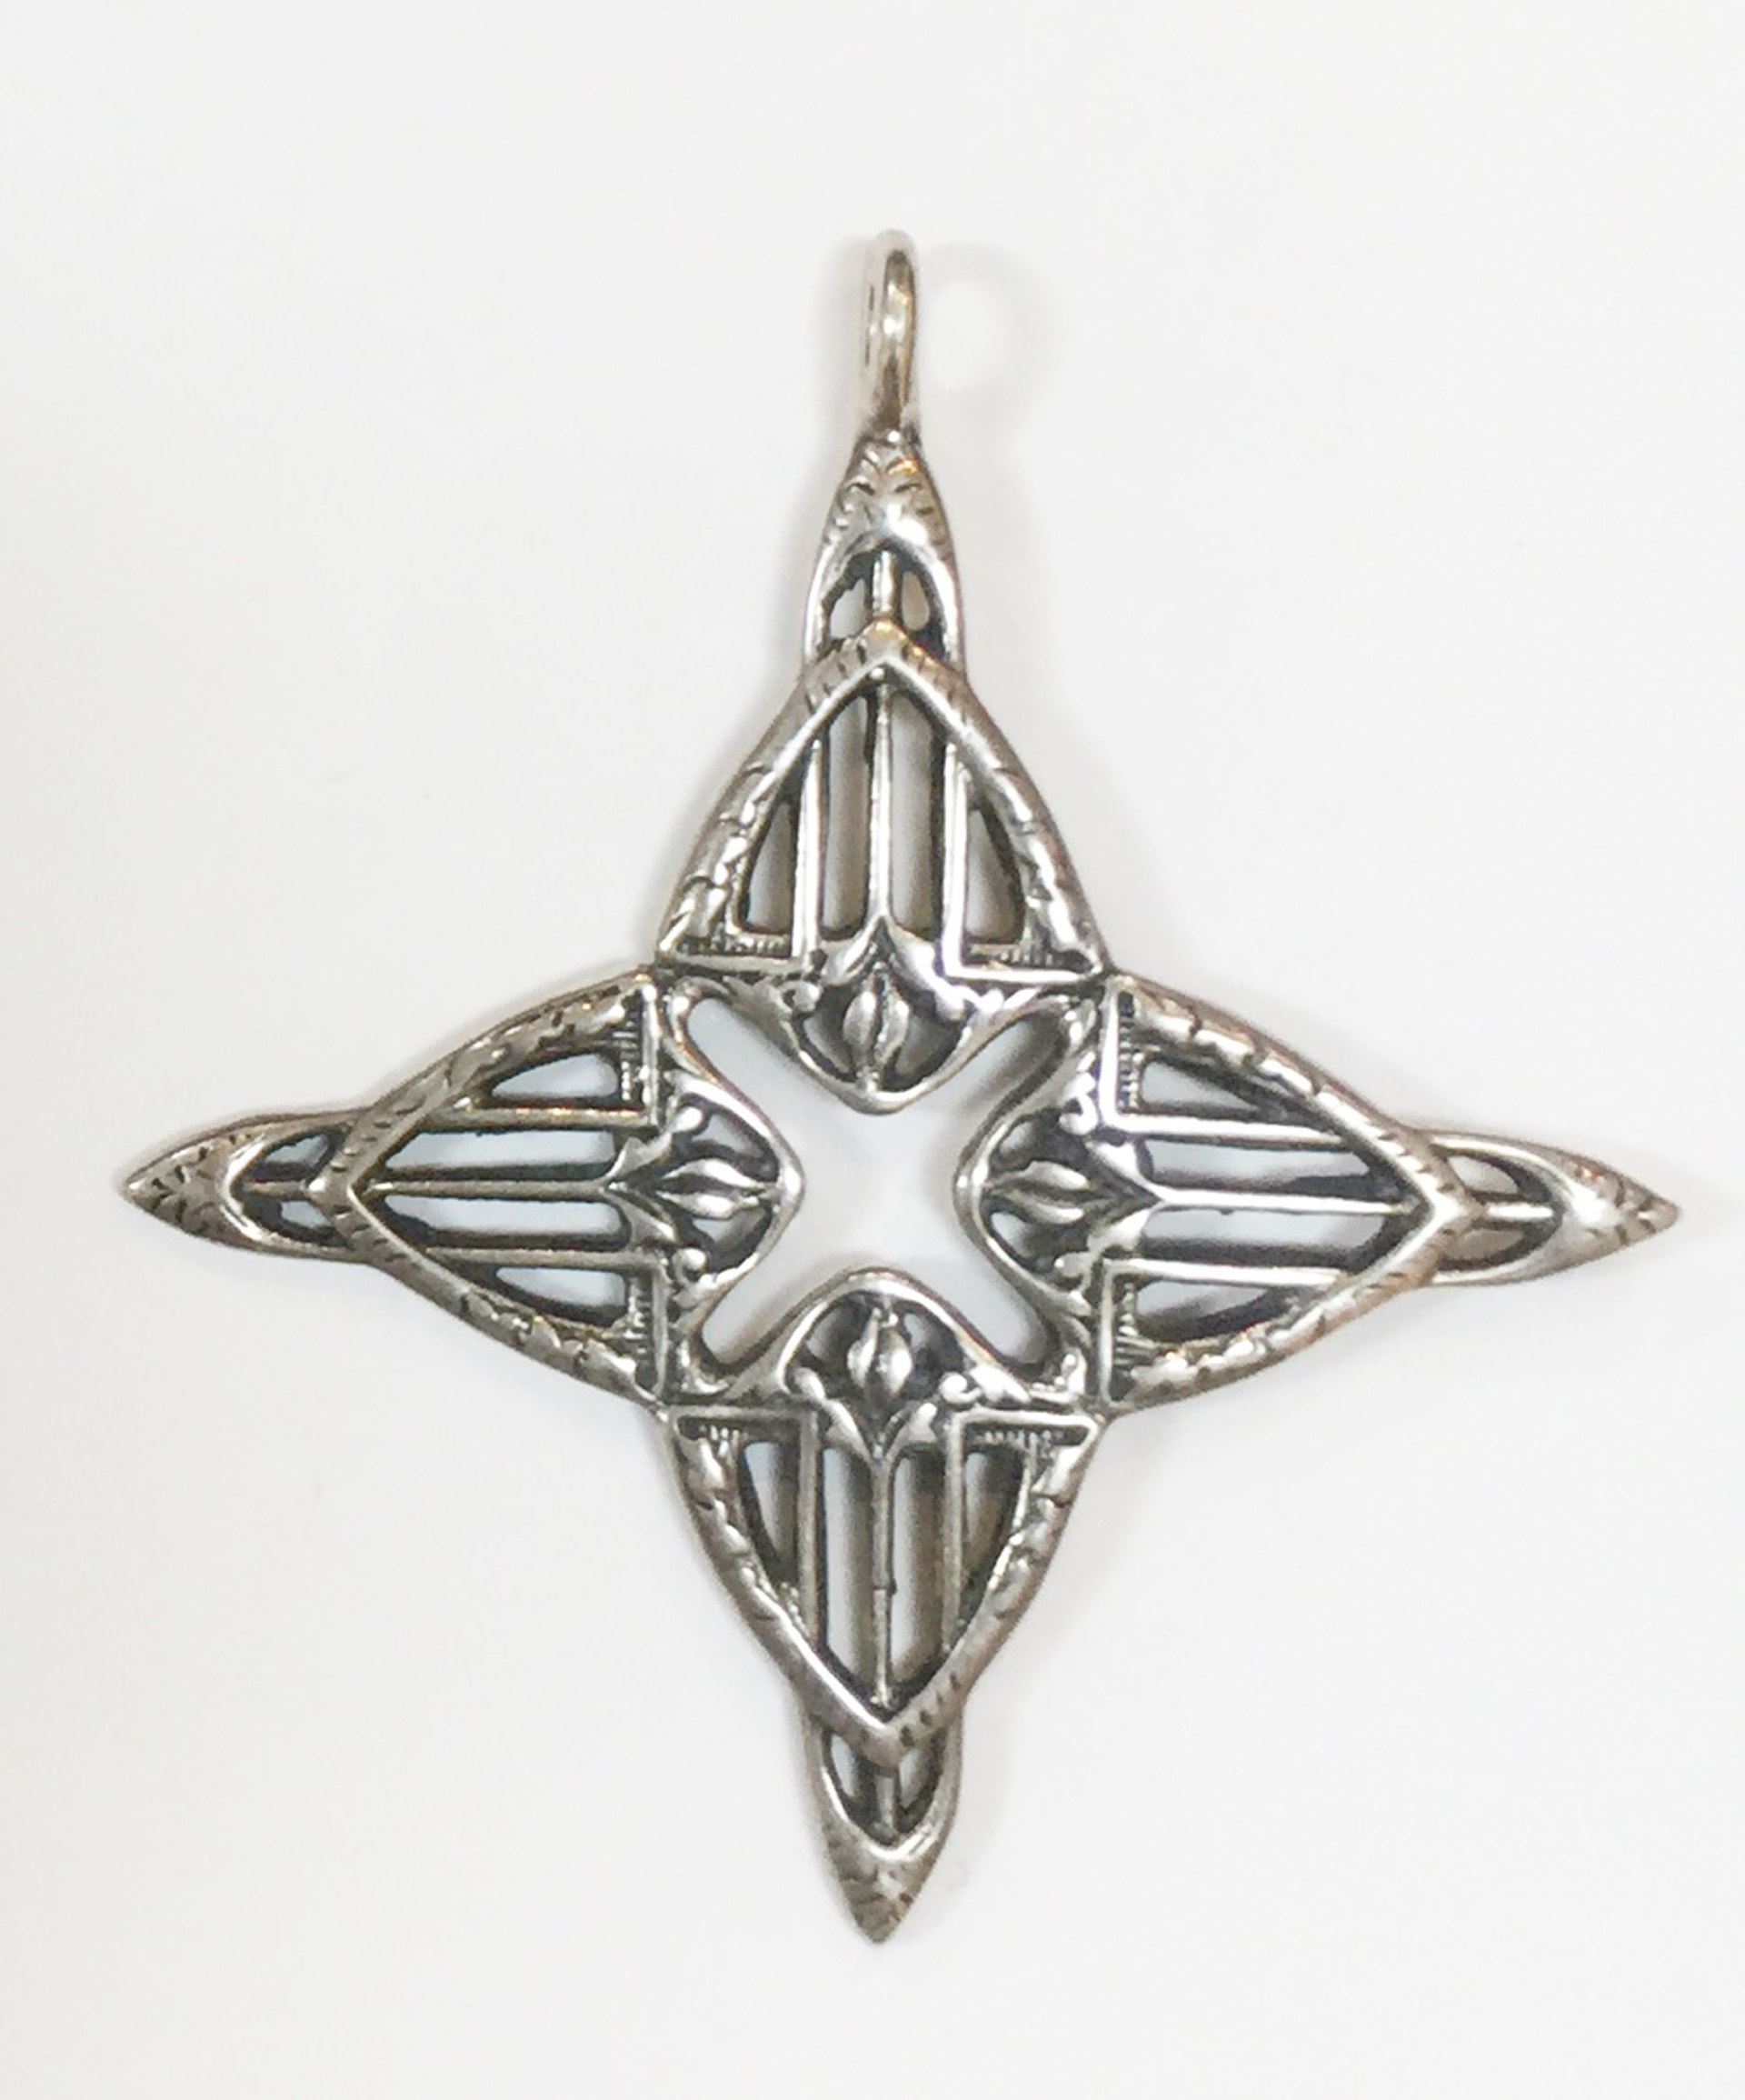 Pendant - Silver Cross Of St Charles 6245 by Deanne McKeown